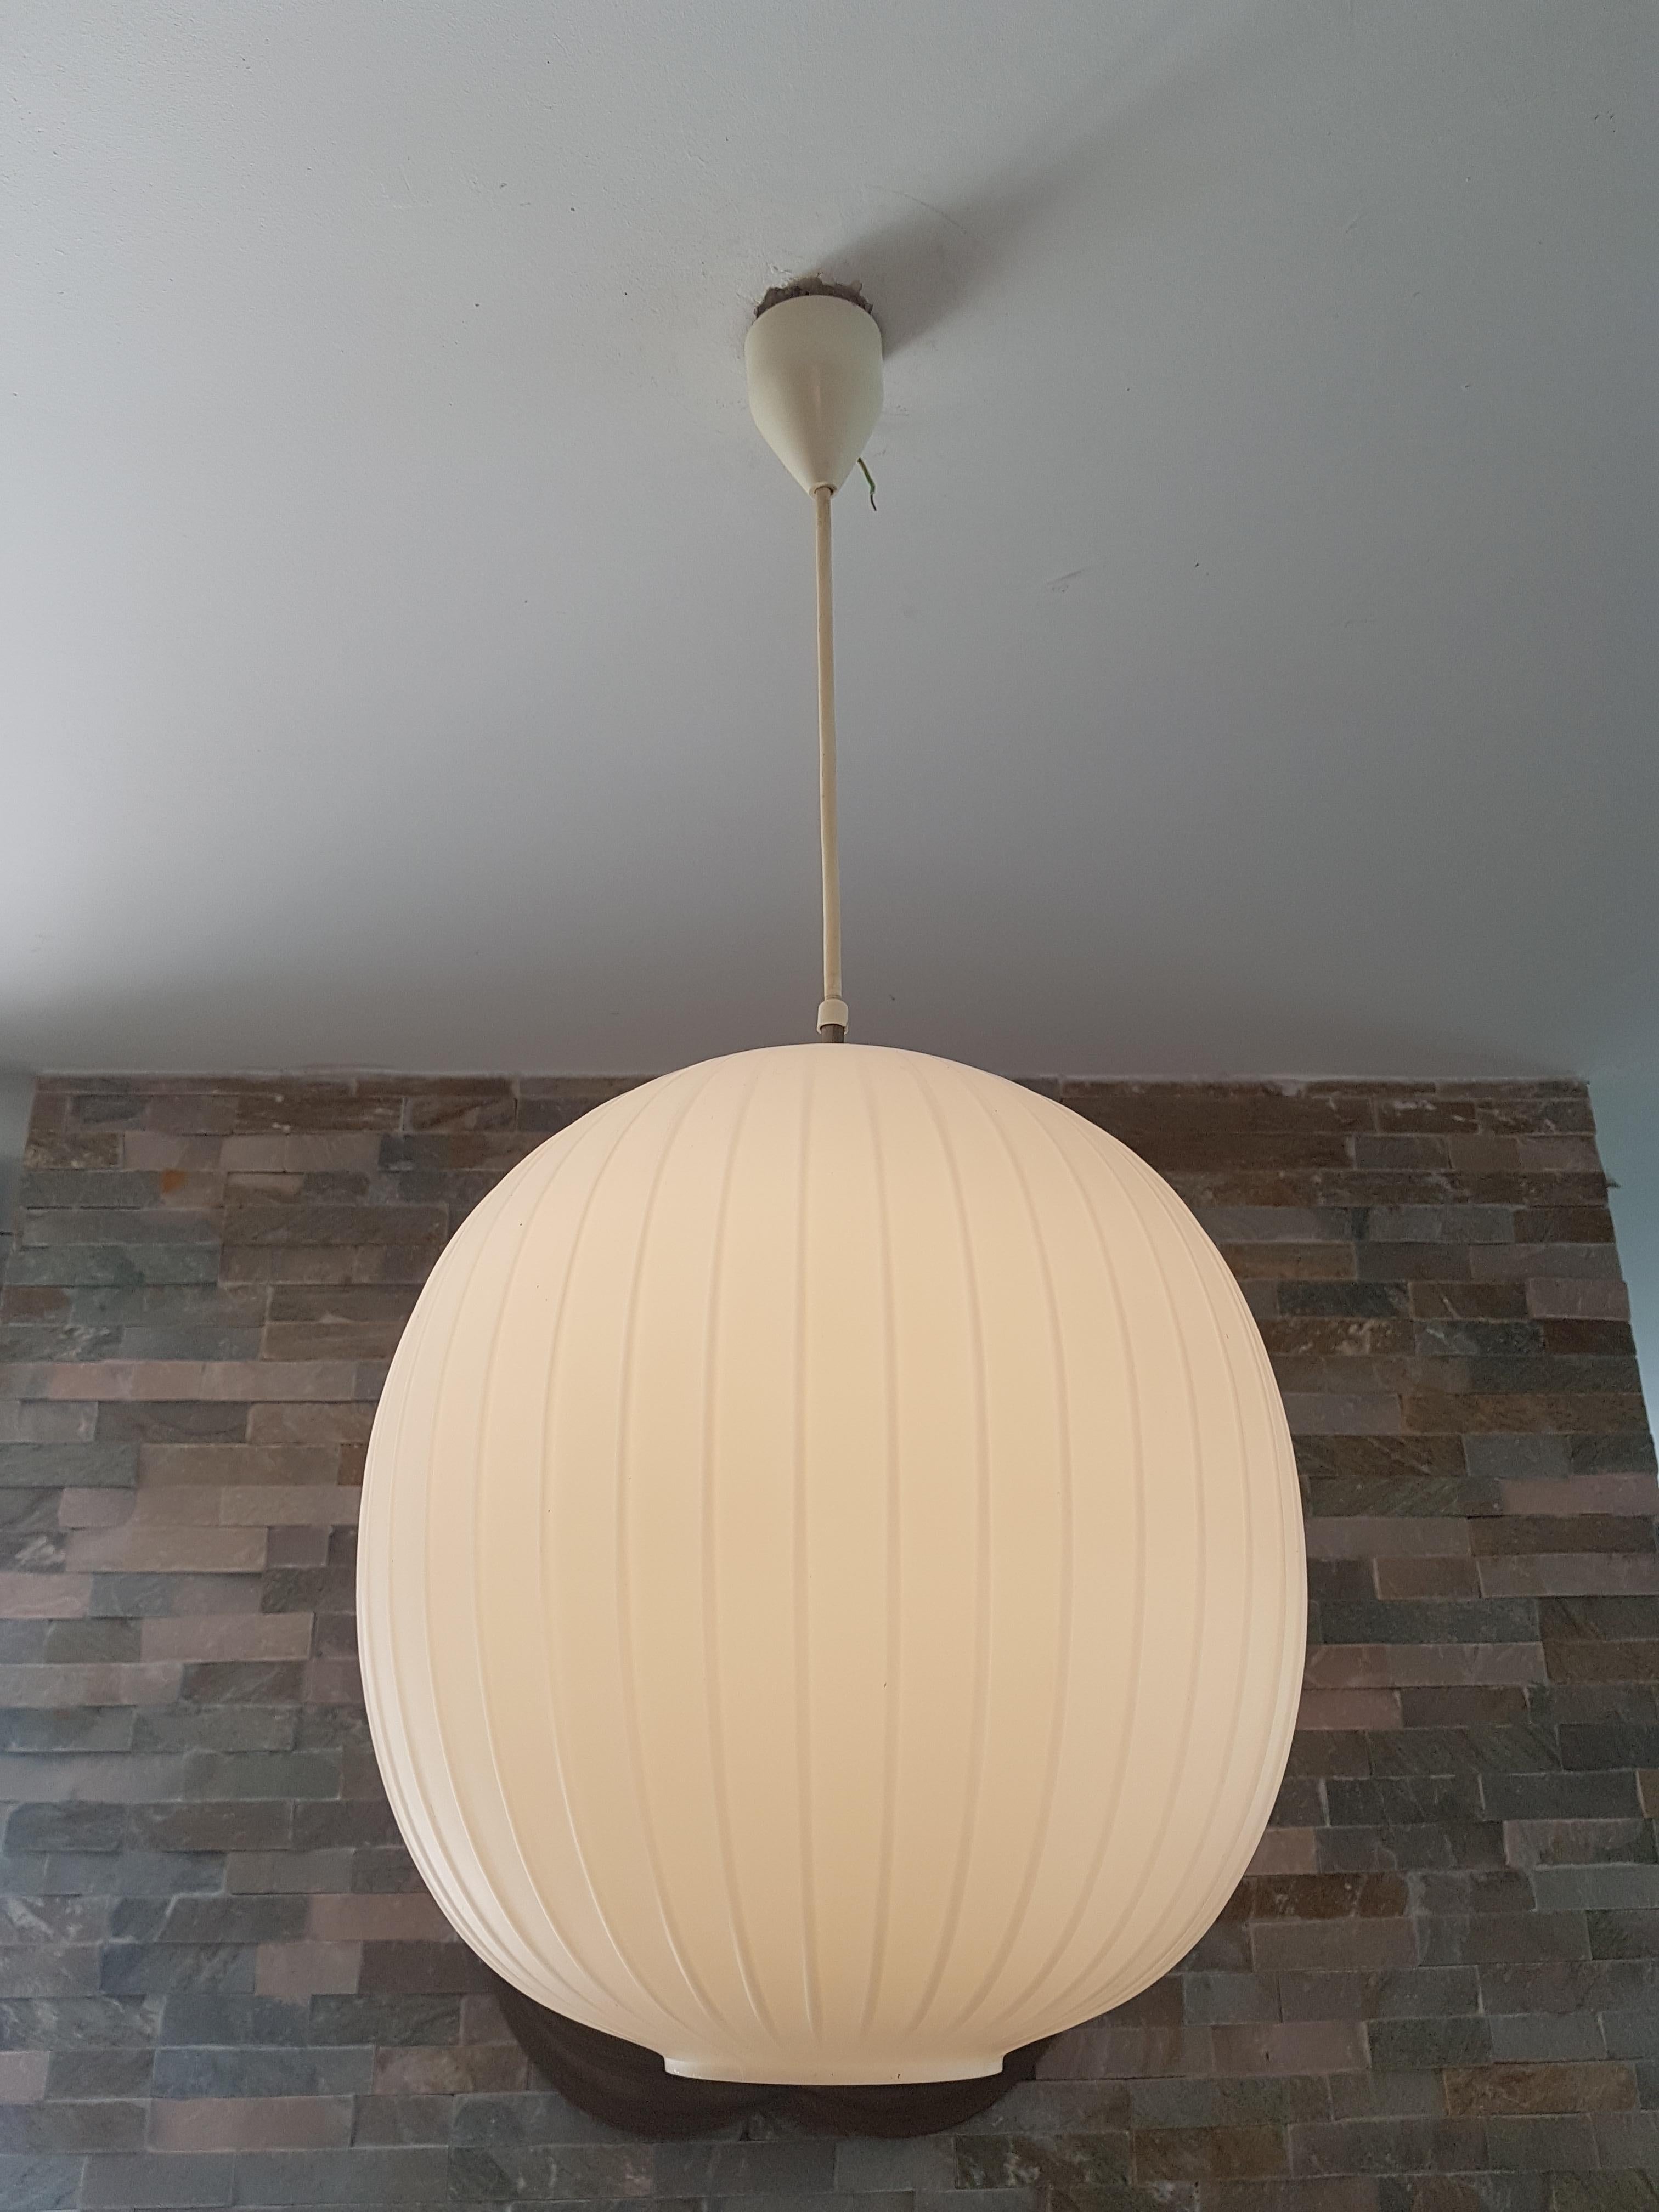 Midcentury Pendant Lamp Bologna by Gangkofner for Peill & Putzler, Germany, 1958 For Sale 12